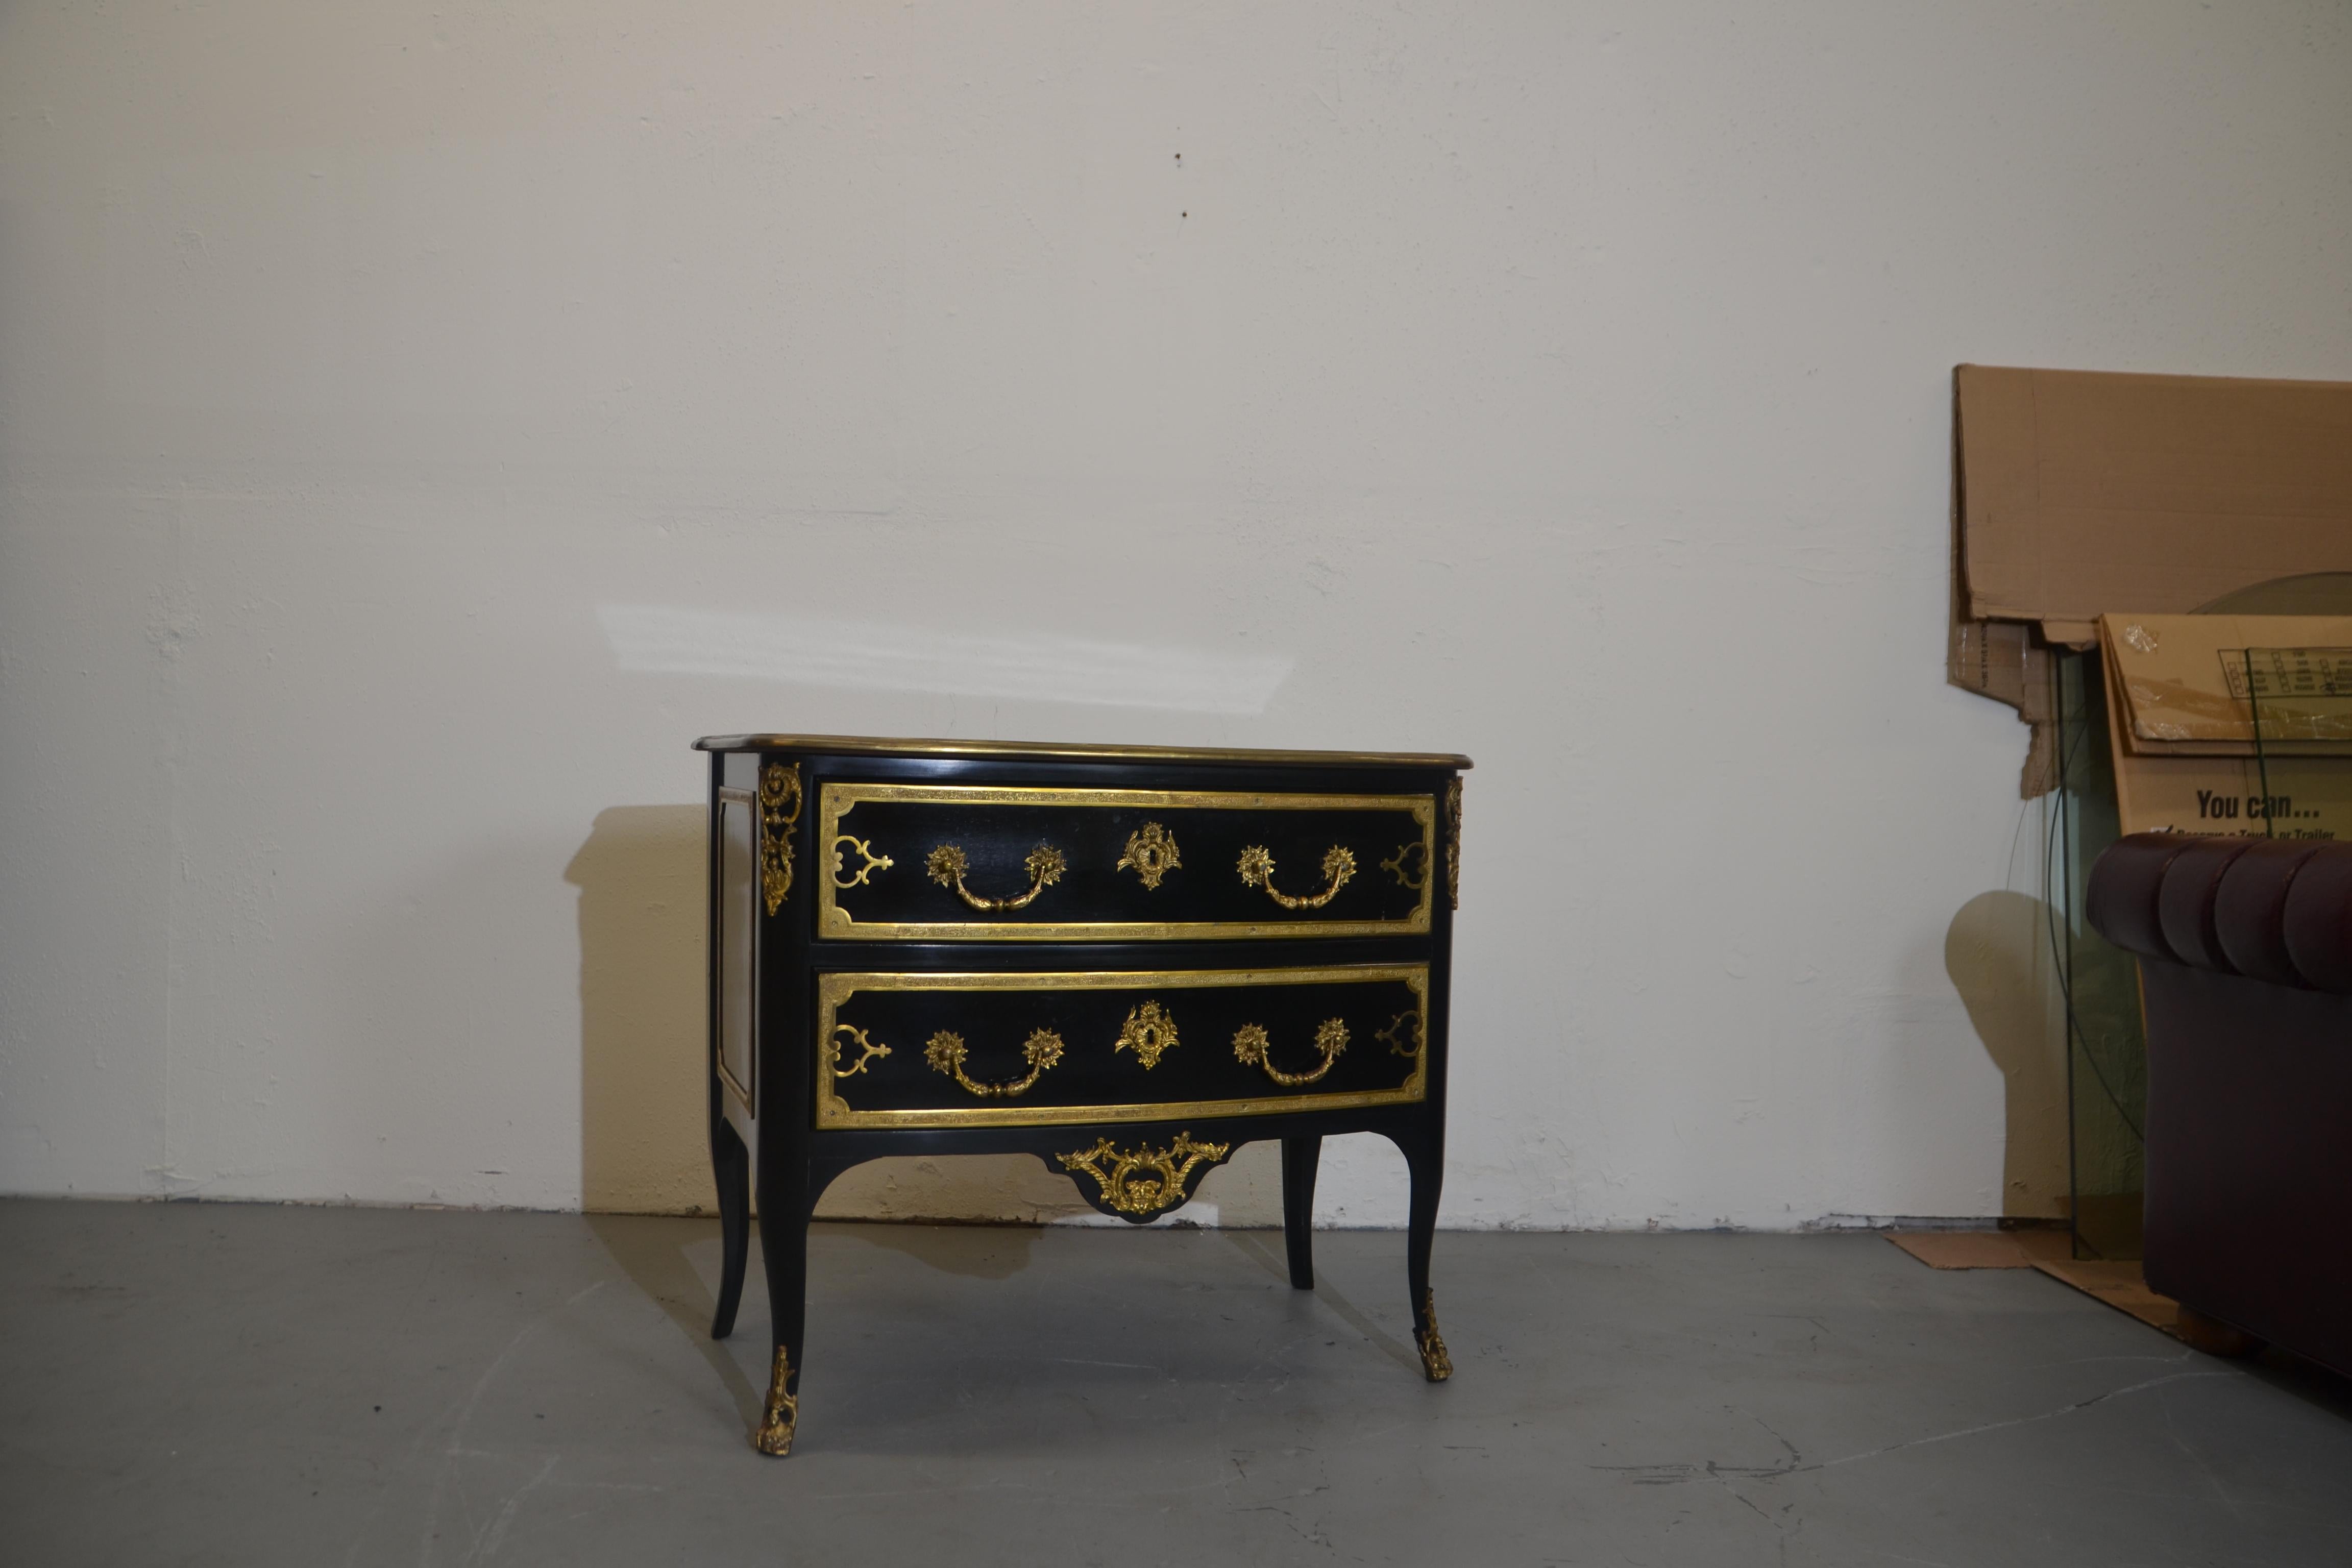 A French Commode Louis style XV. Ebonized finish and profusely decorated throughout with gilded decorations and ornate hardware.